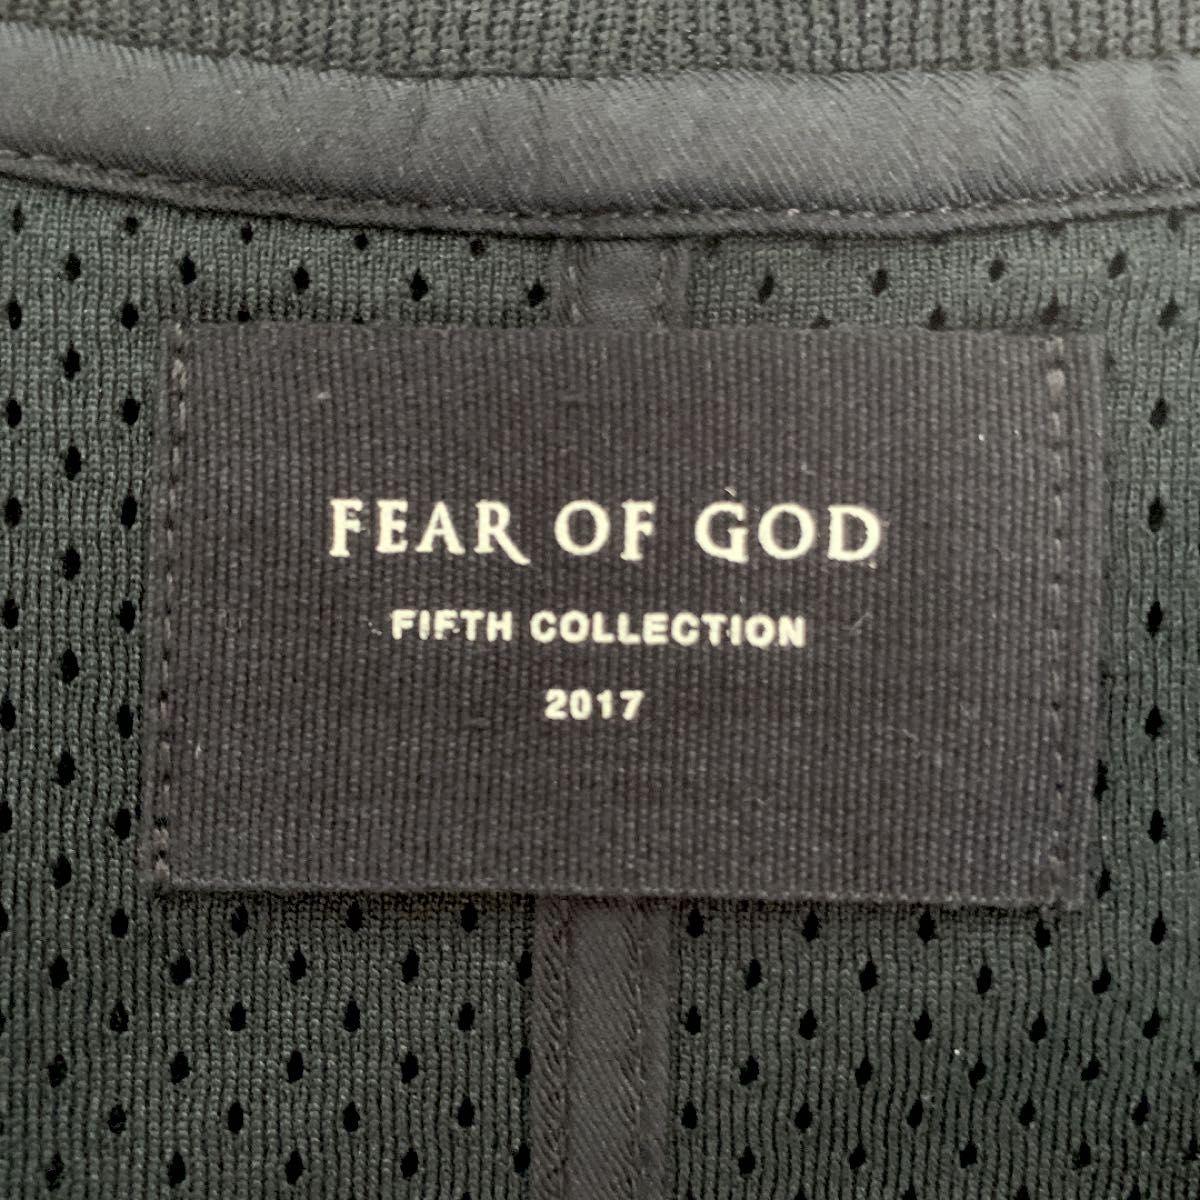 FEAR OF GOD　mesh football jersey　FIFTH COLLECTION 2017AW　S-M